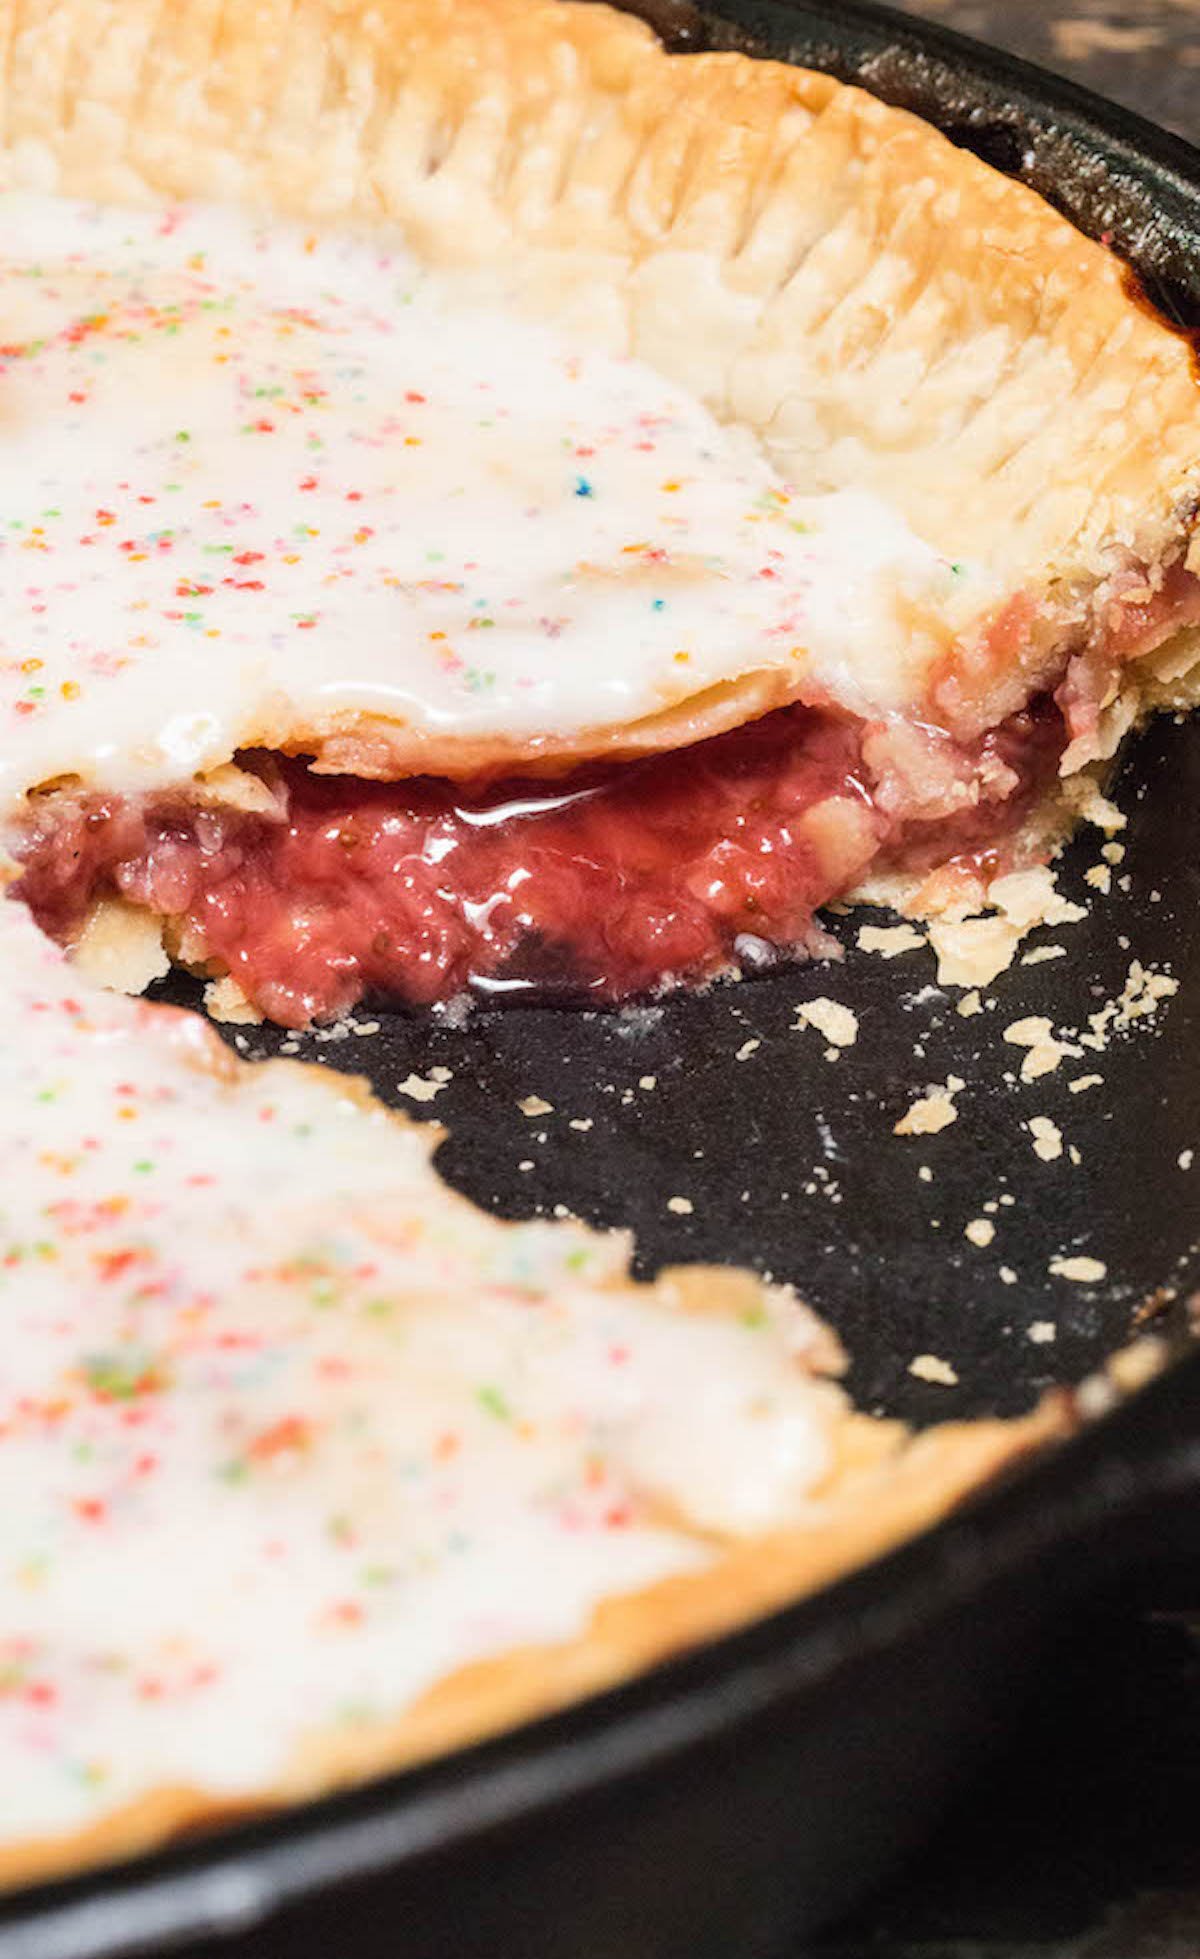 A cast iron skillet is filled with a strawberry pie that is glazed like a pop-tart. One slices has been removed to show the strawberry filling inside.